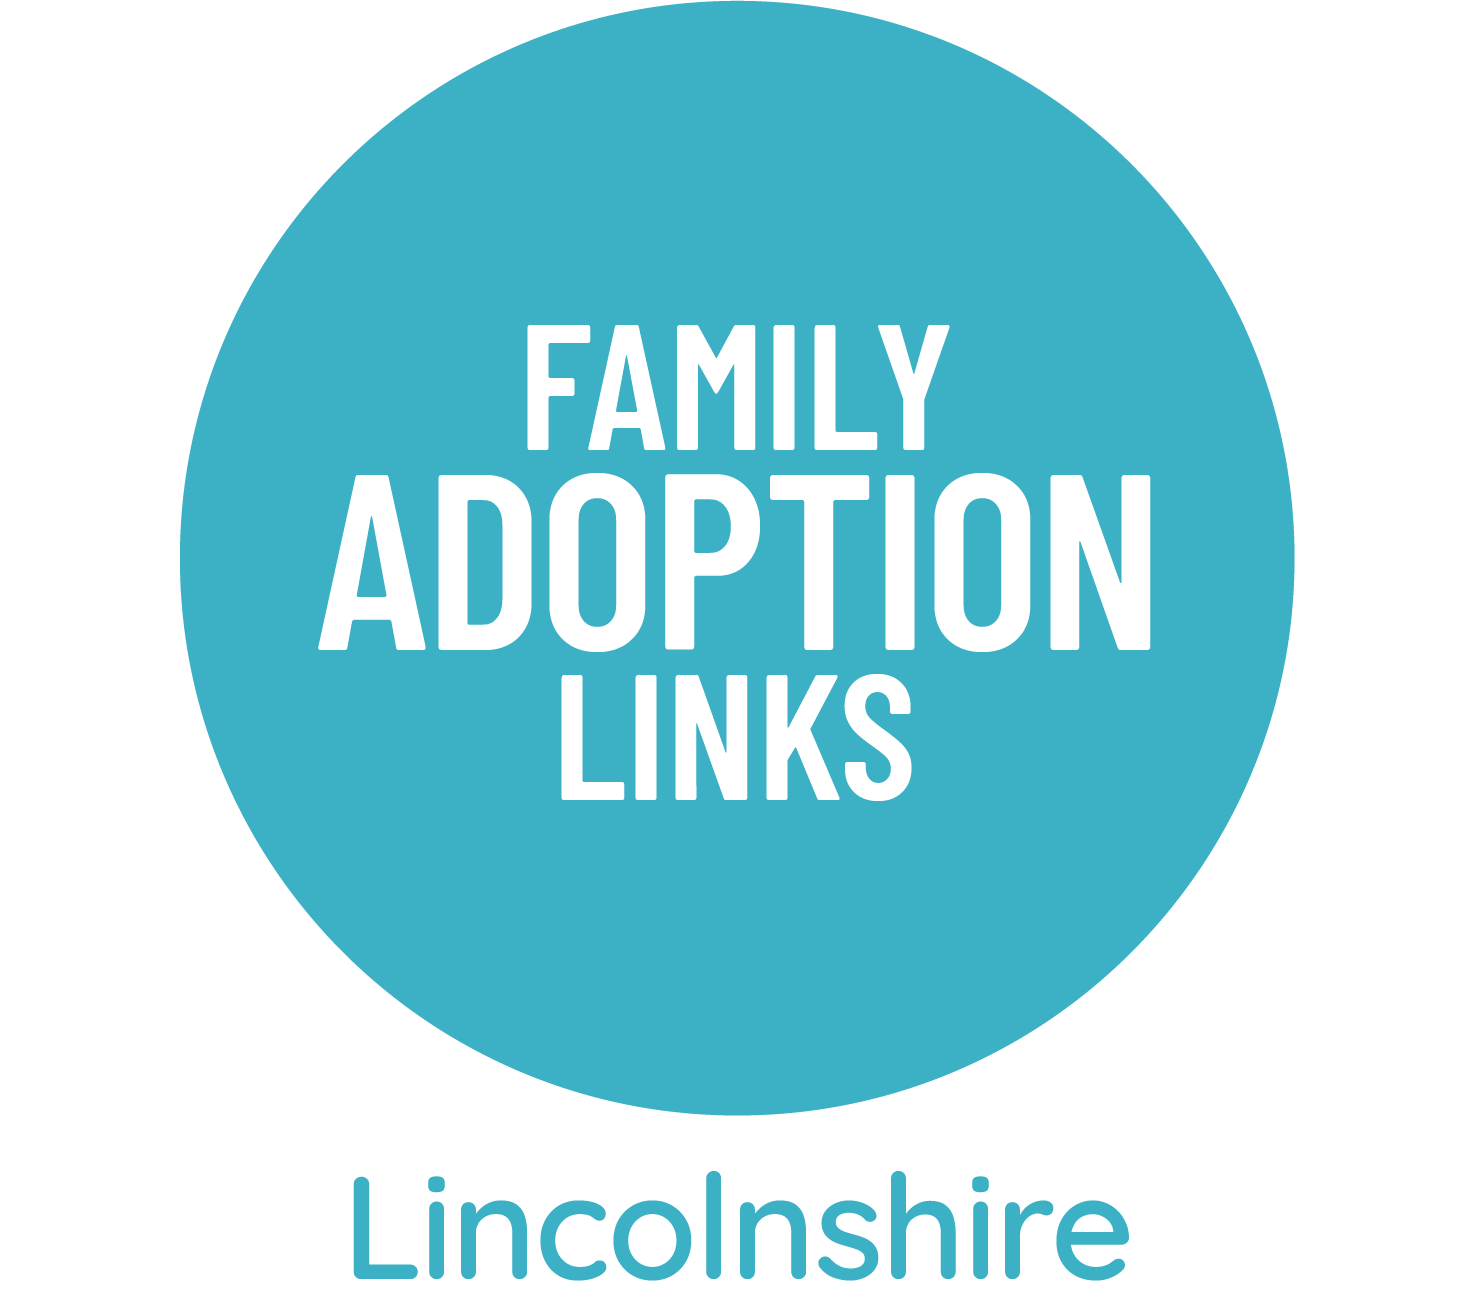 Blue circular logo for Family Adoption Links in Lincolnshire